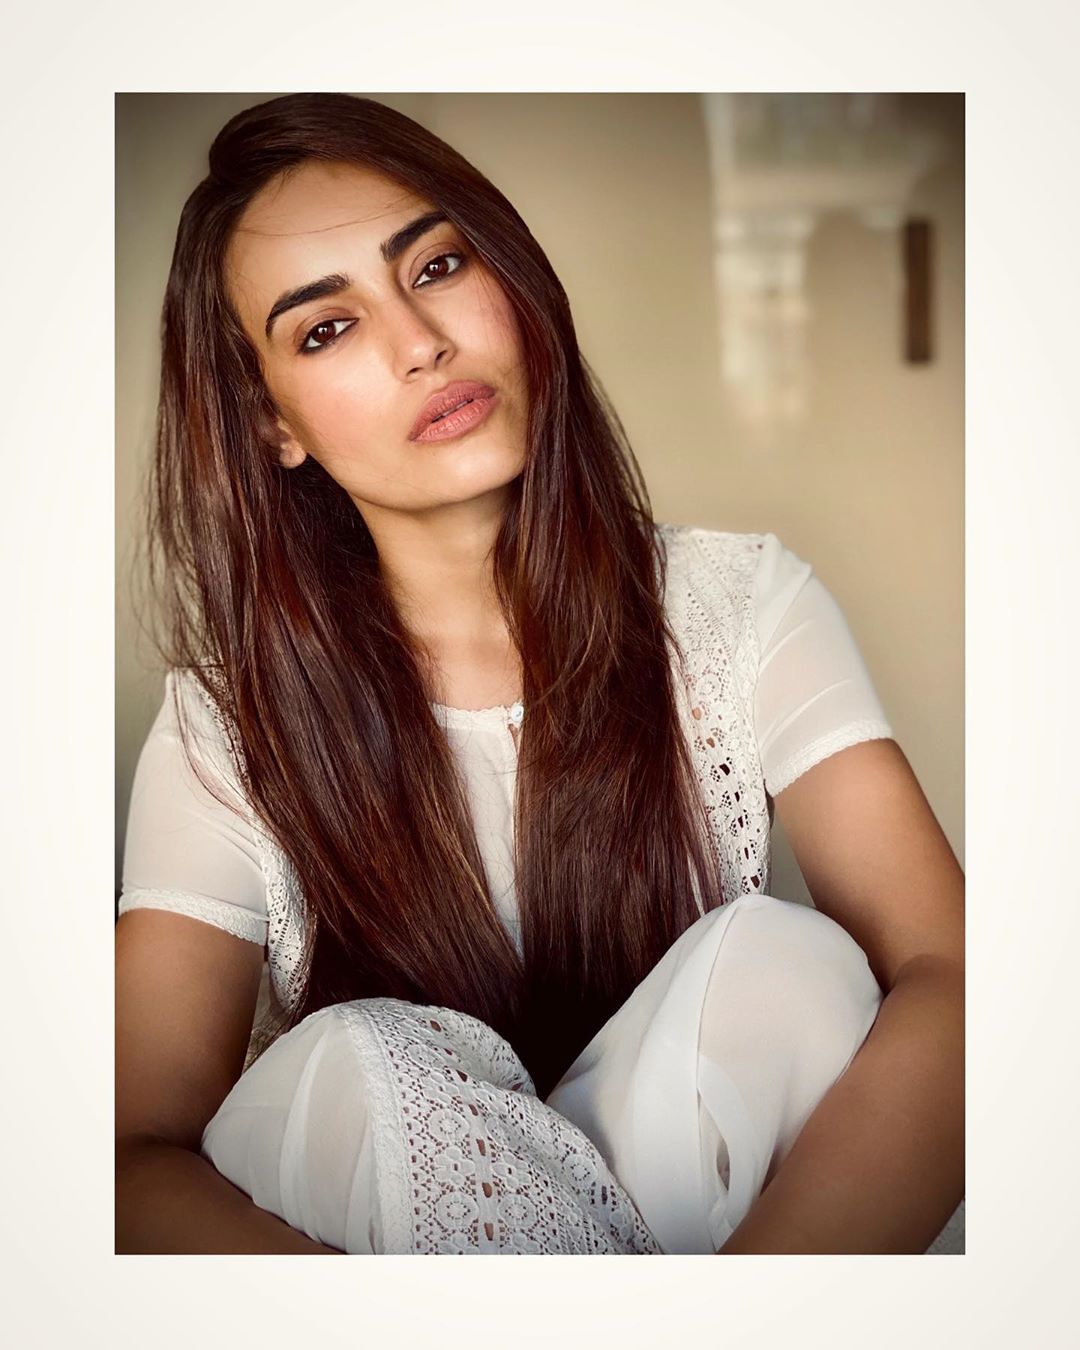 No Makeup Looks From Surbhi Jyoti Are On Point!